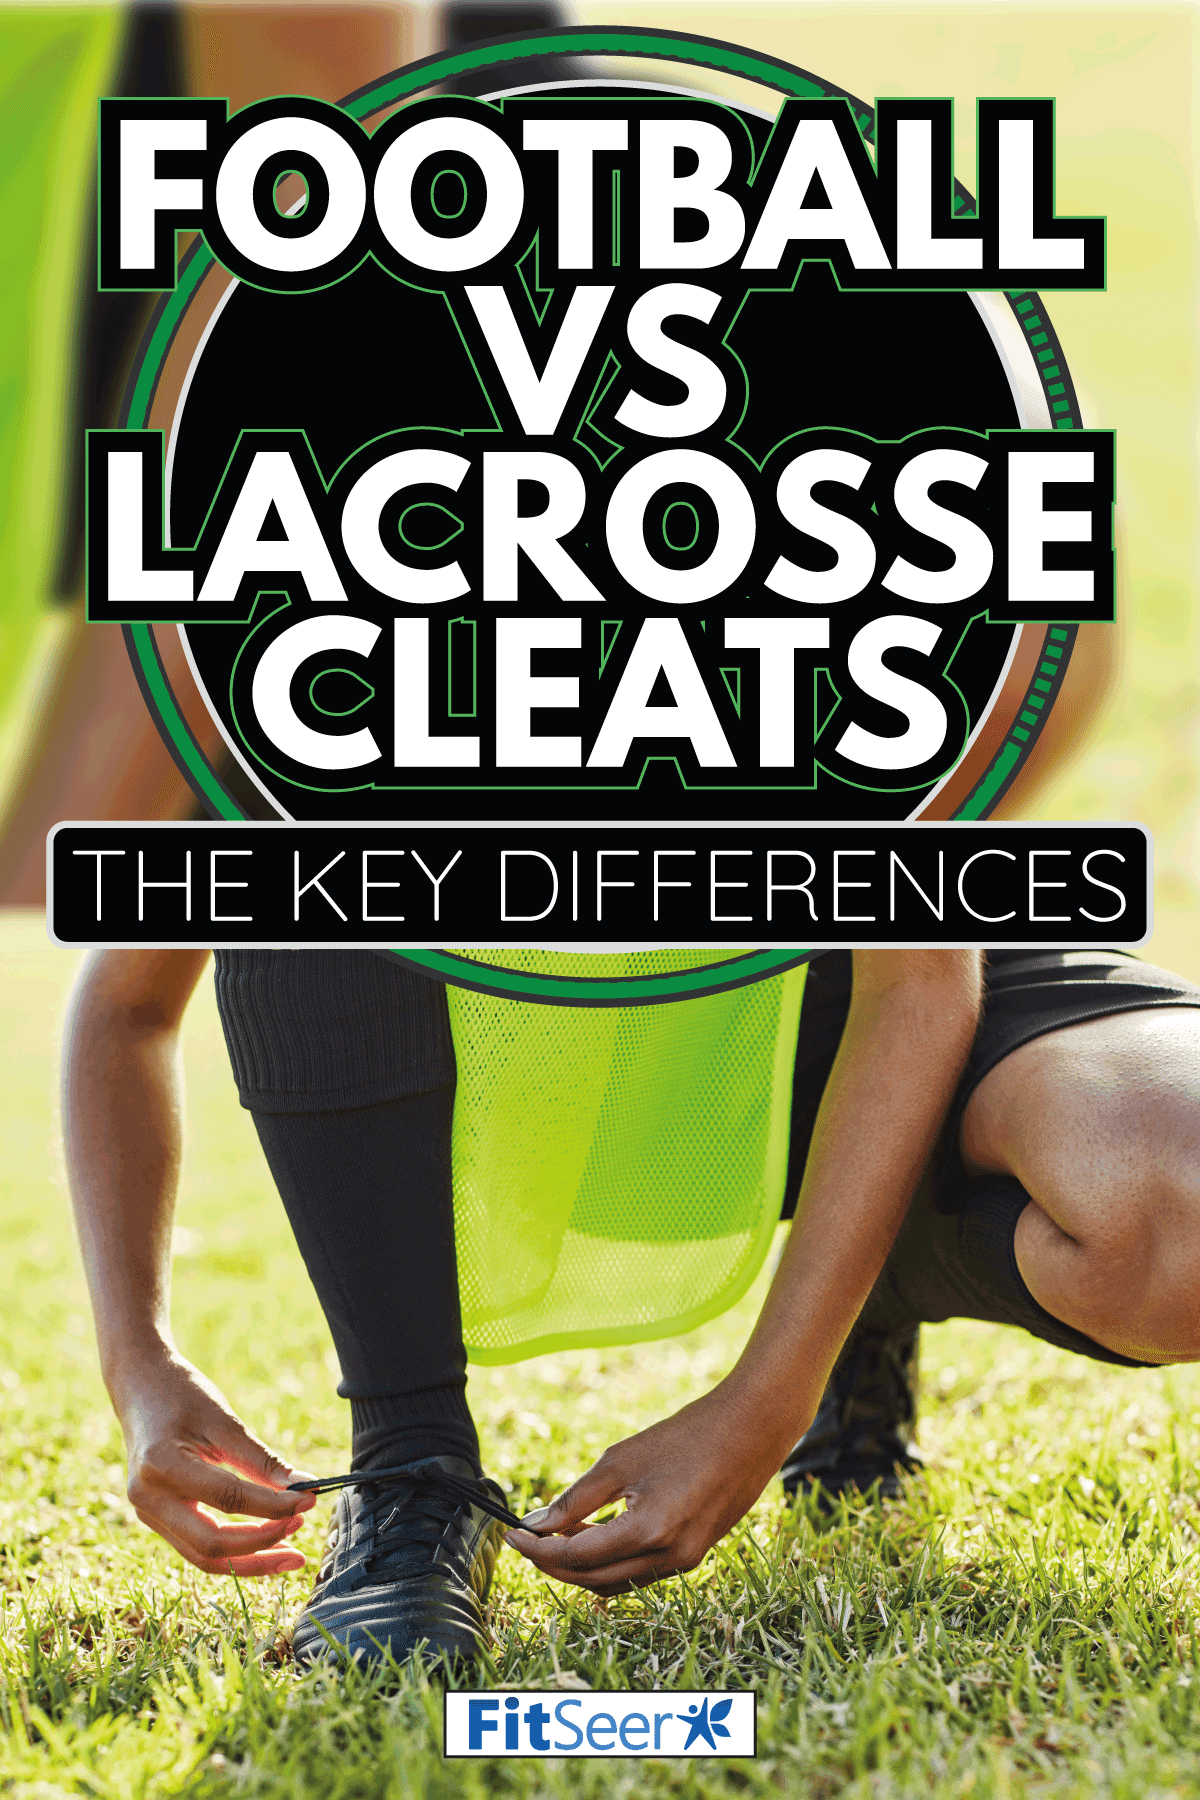 emale player lacing up her cleats, outdoors on the field. Football Vs Lacrosse Cleats—The Key Differences